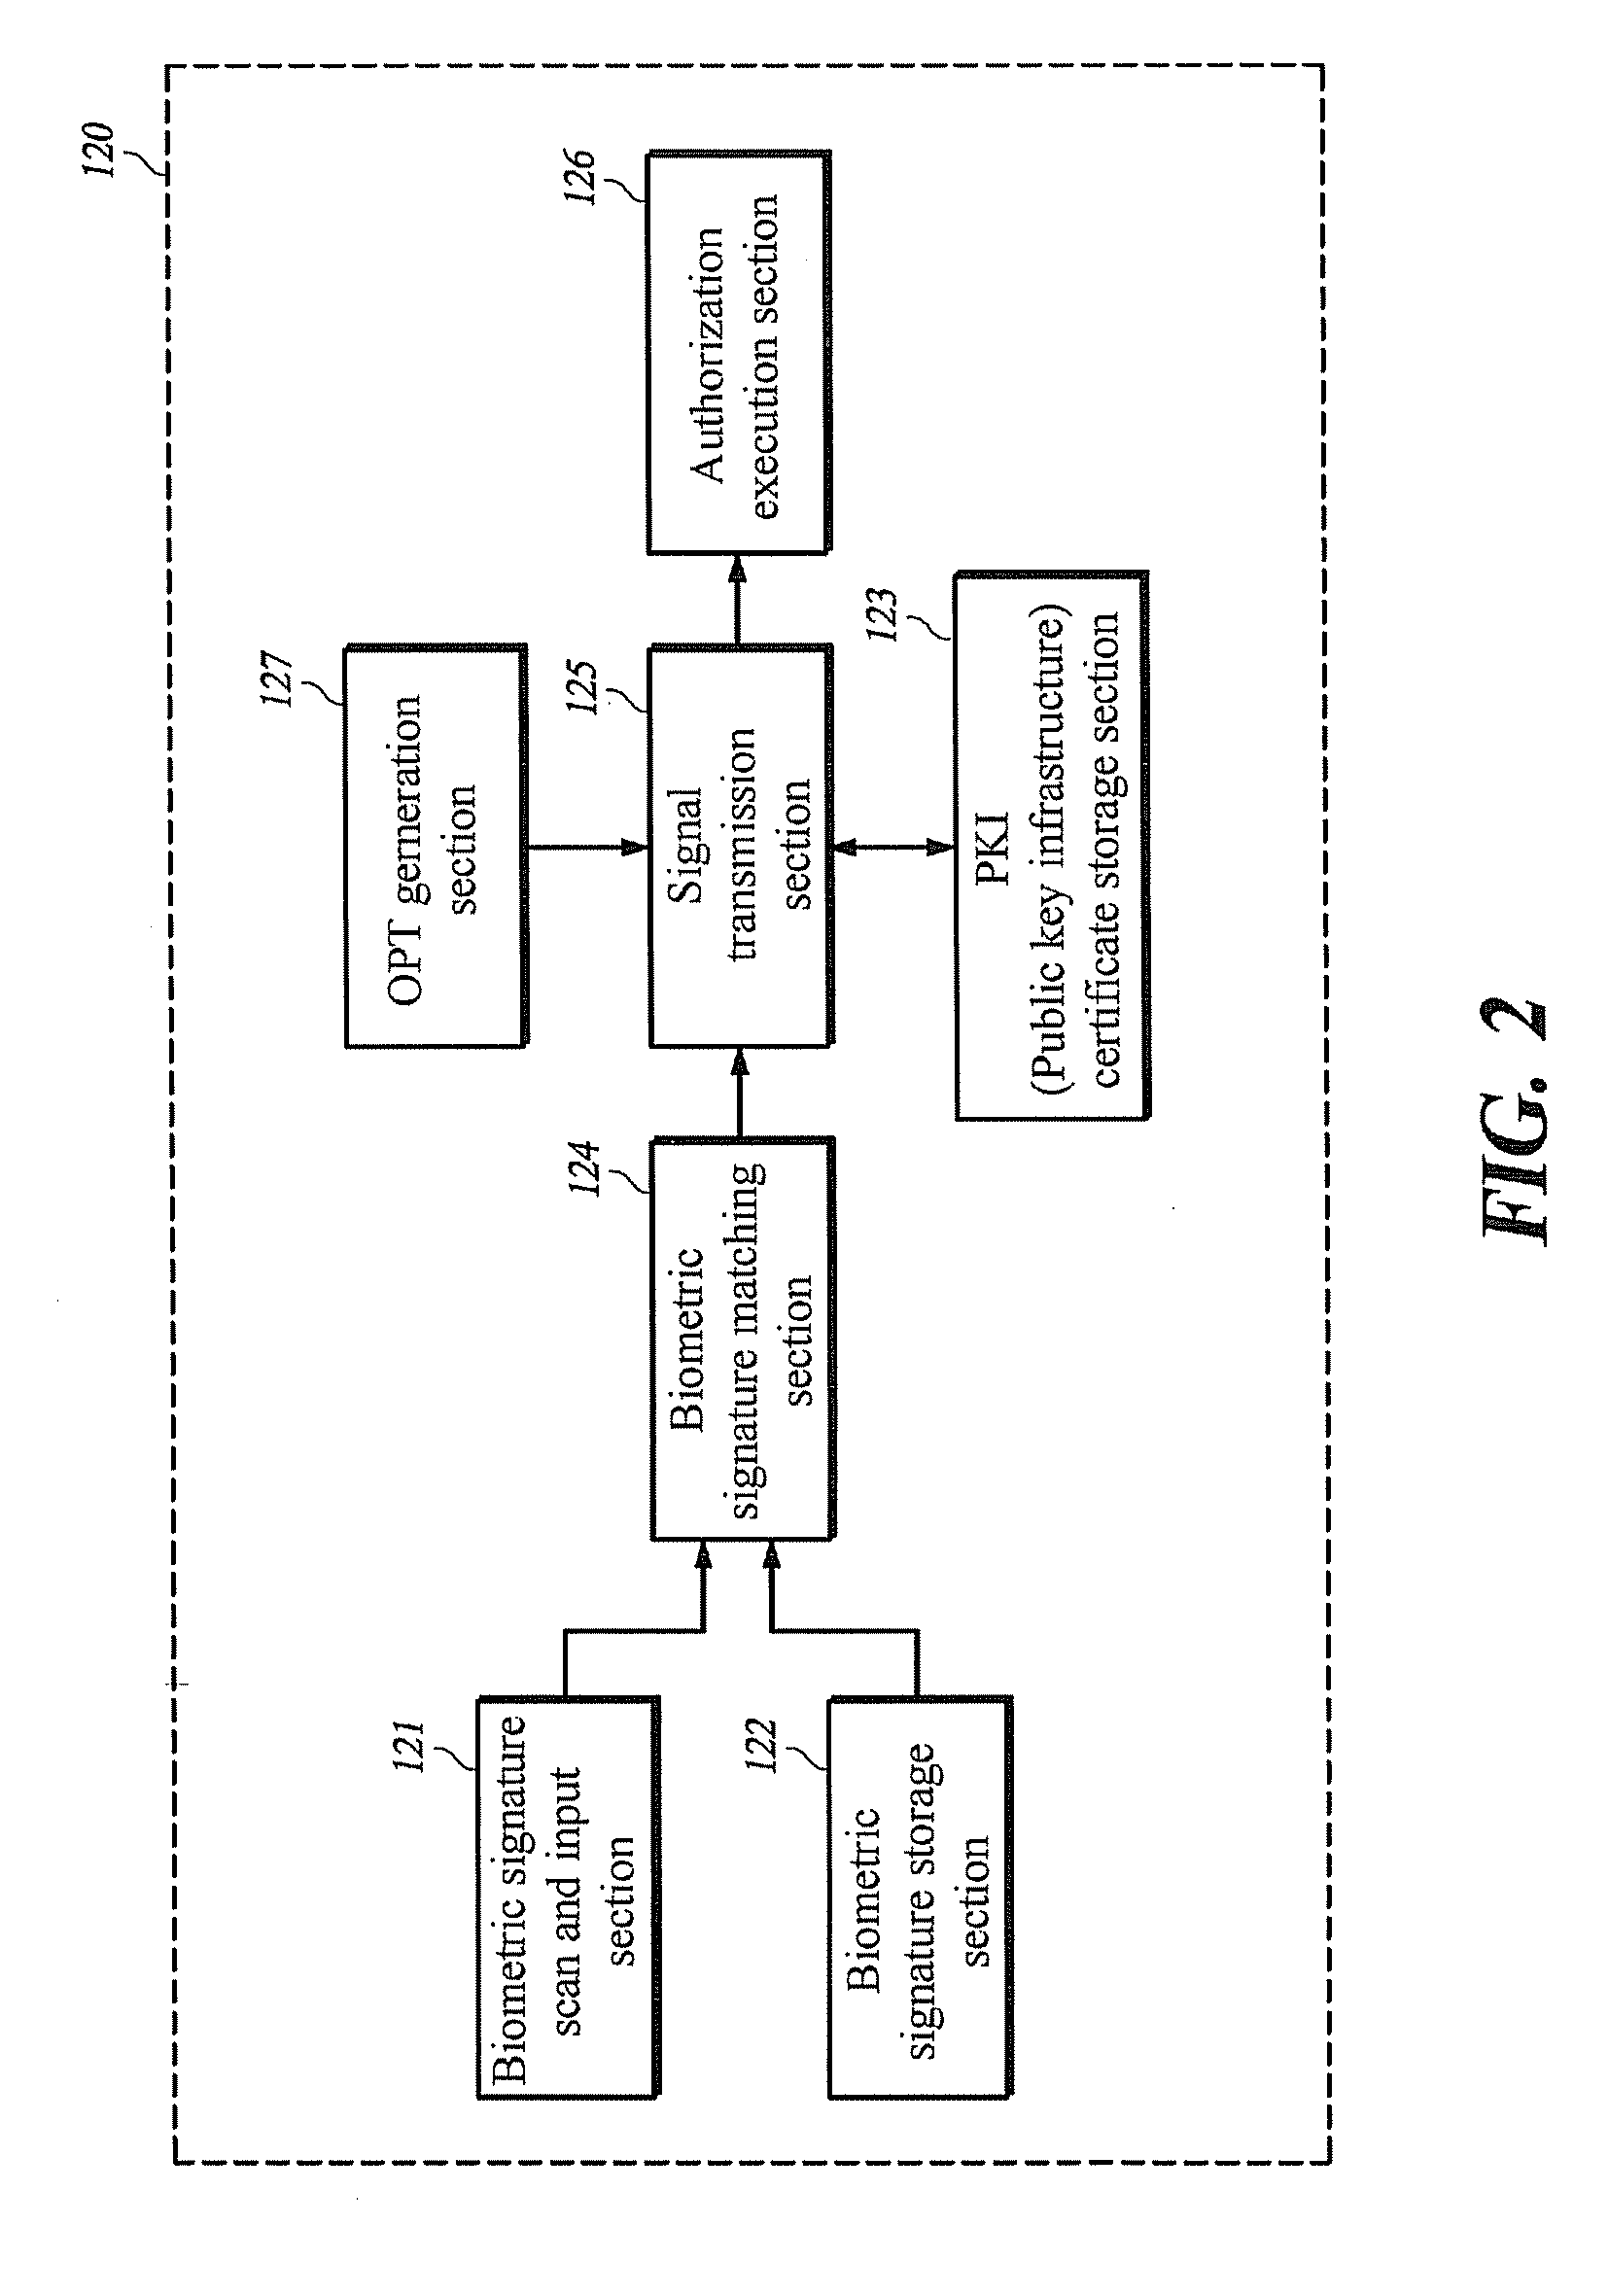 User authentication system, user authentication apparatus, smart card, and user authentication method for ubiquitous authentication management